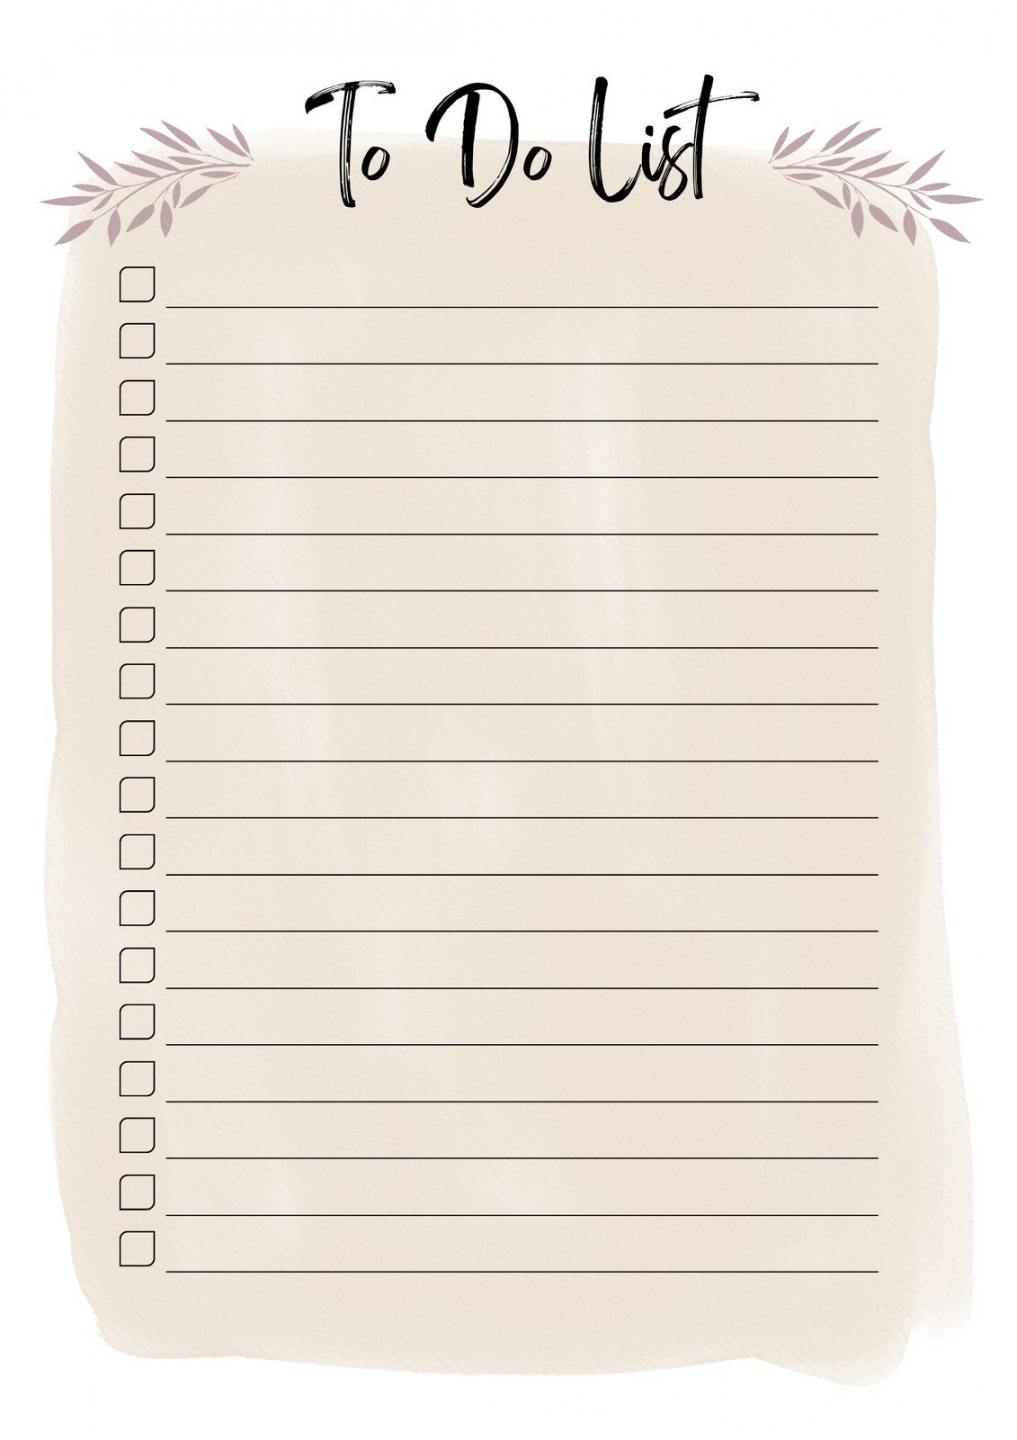 Free and customizable to do list templates - FREE Printables - Free Printable To Do List